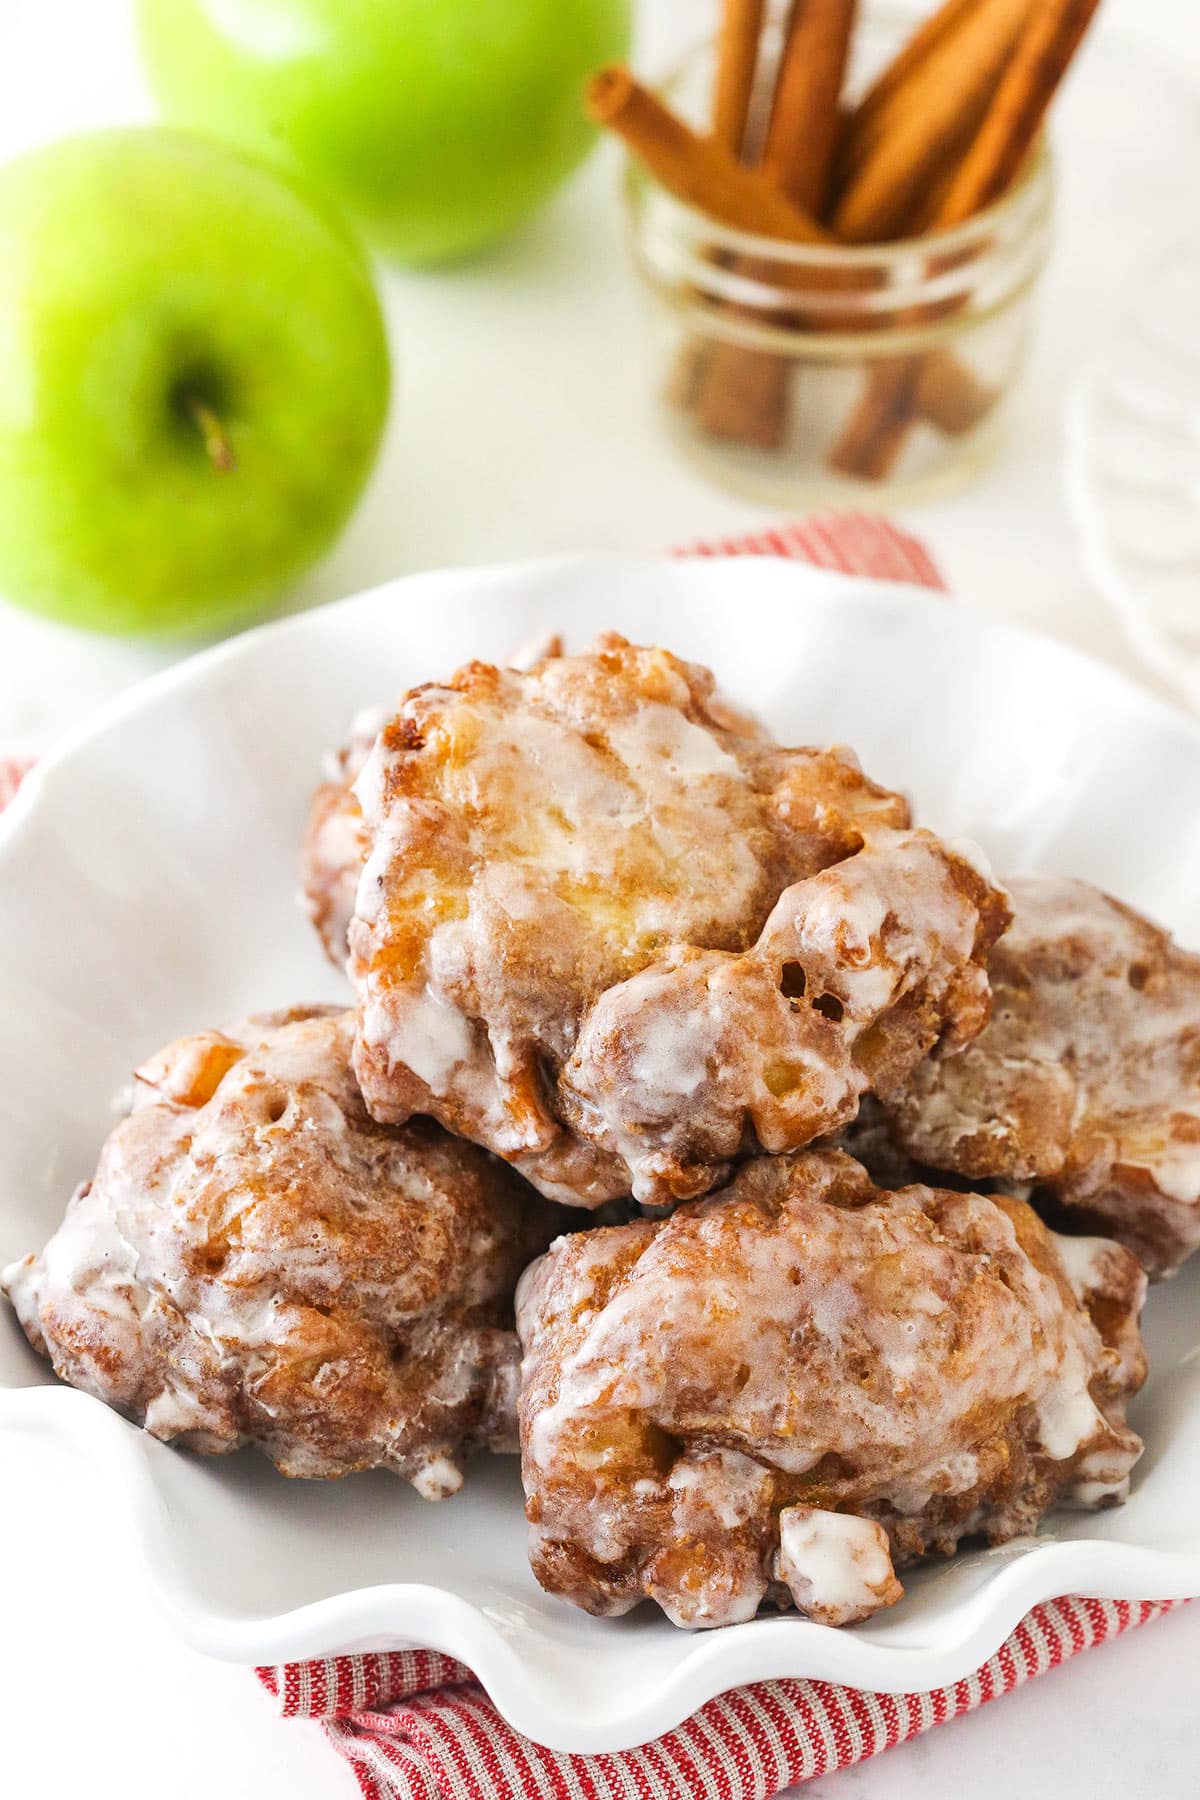 Five homemade apple fritters coated in vanilla glaze on a marble countertop